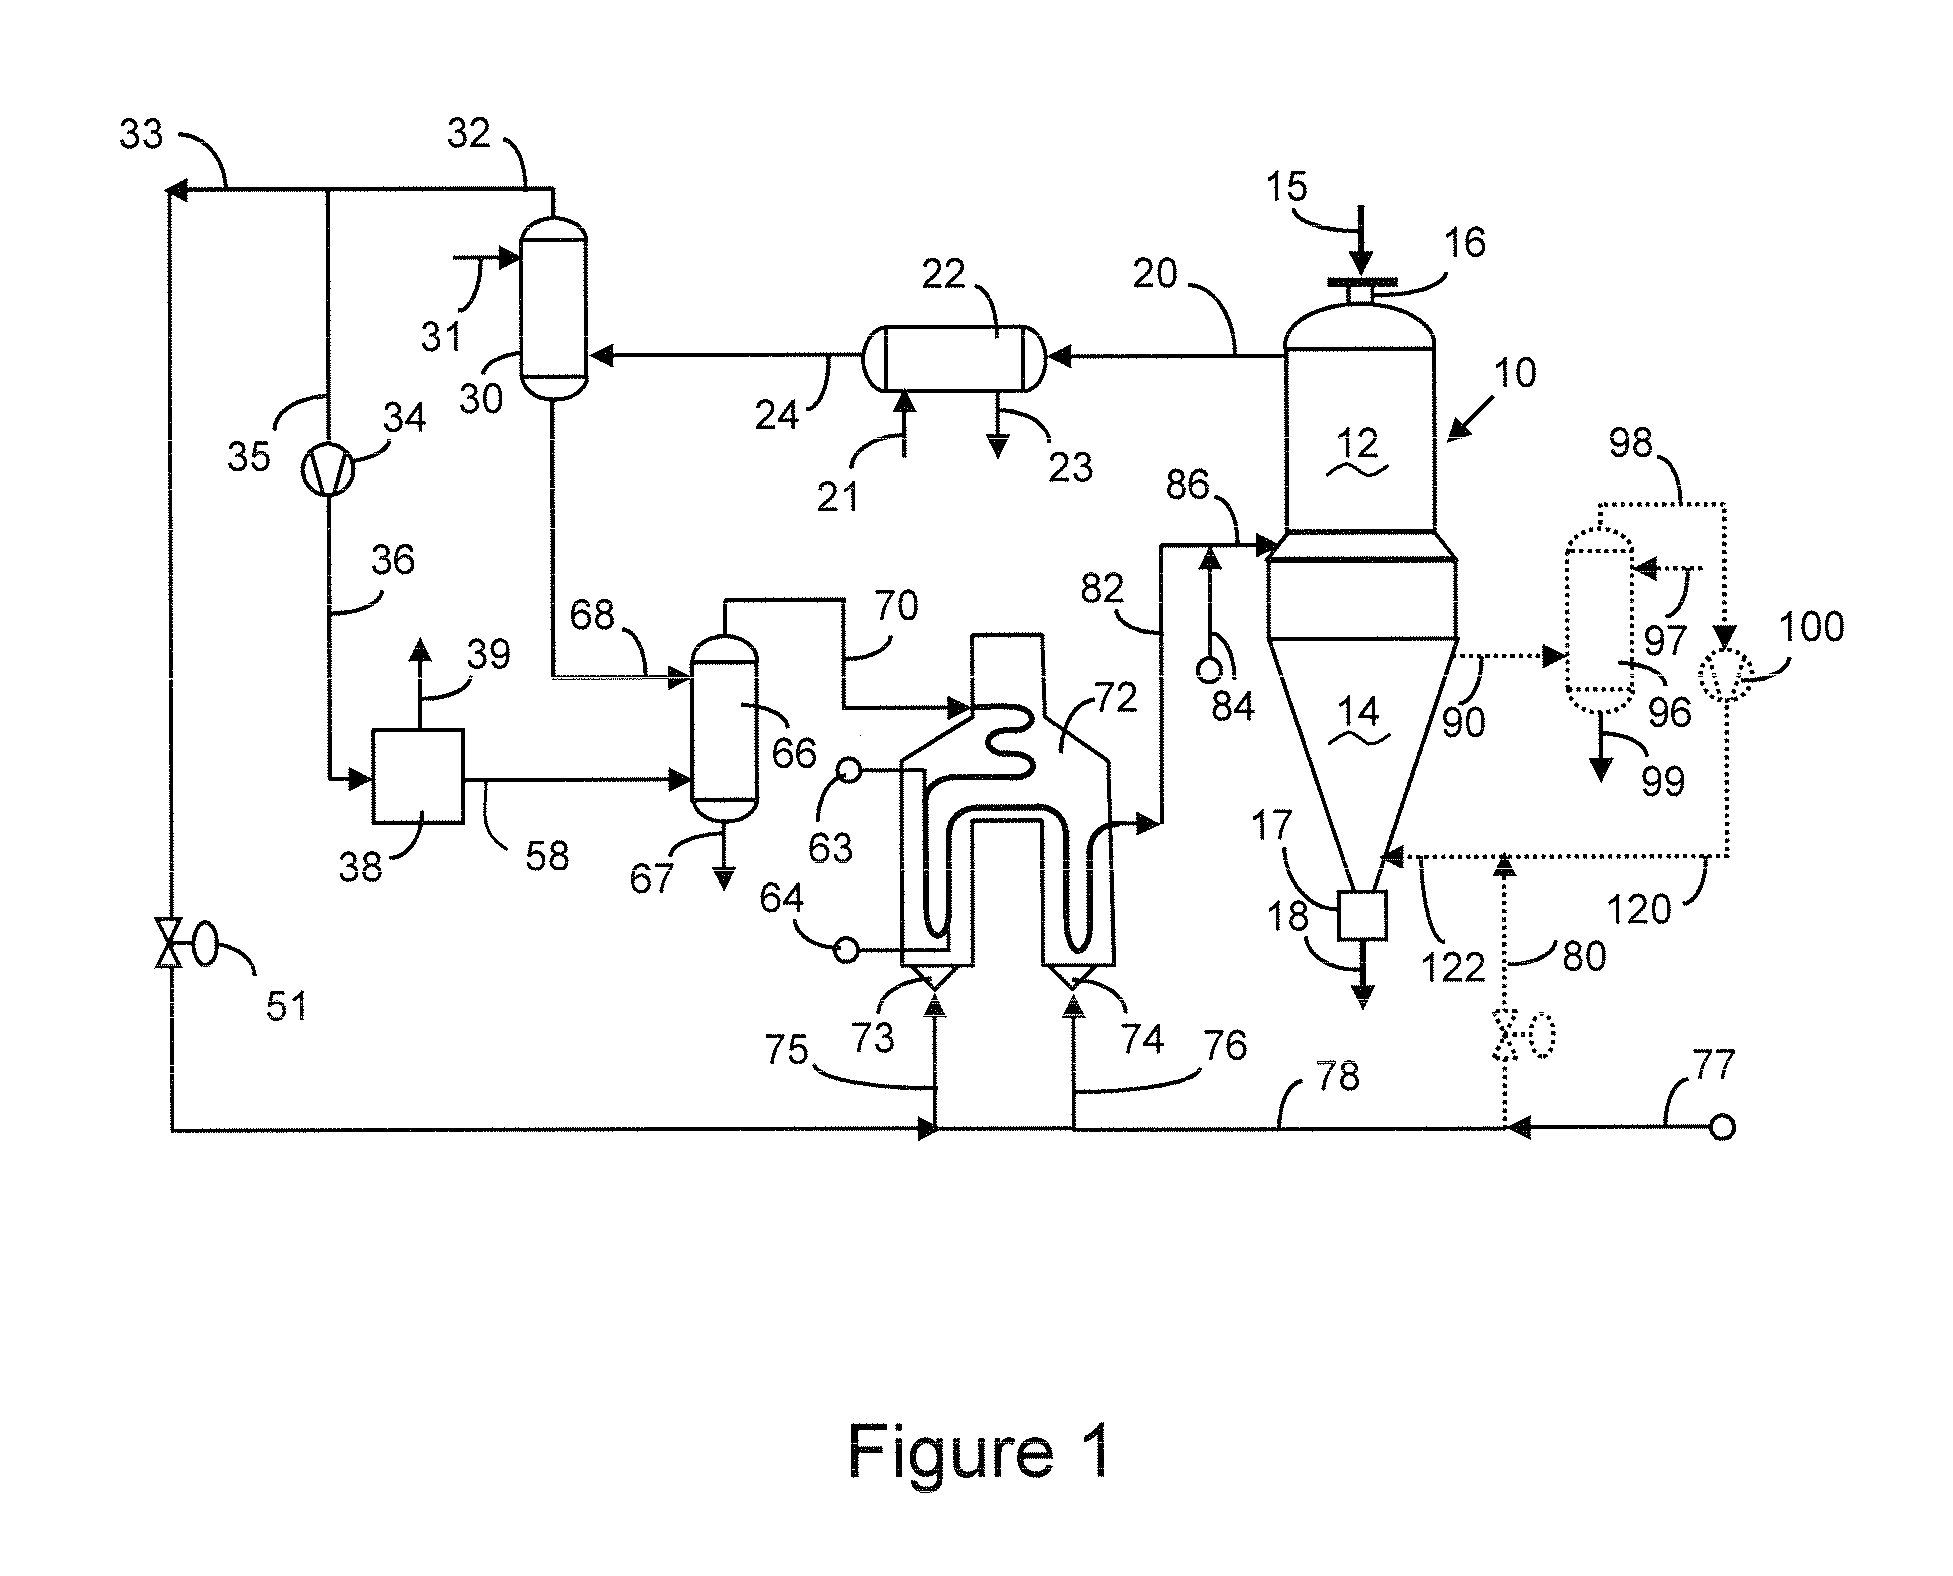 Method and apparatus for production of direct reduced iron (DRI) utilizing coke oven gas